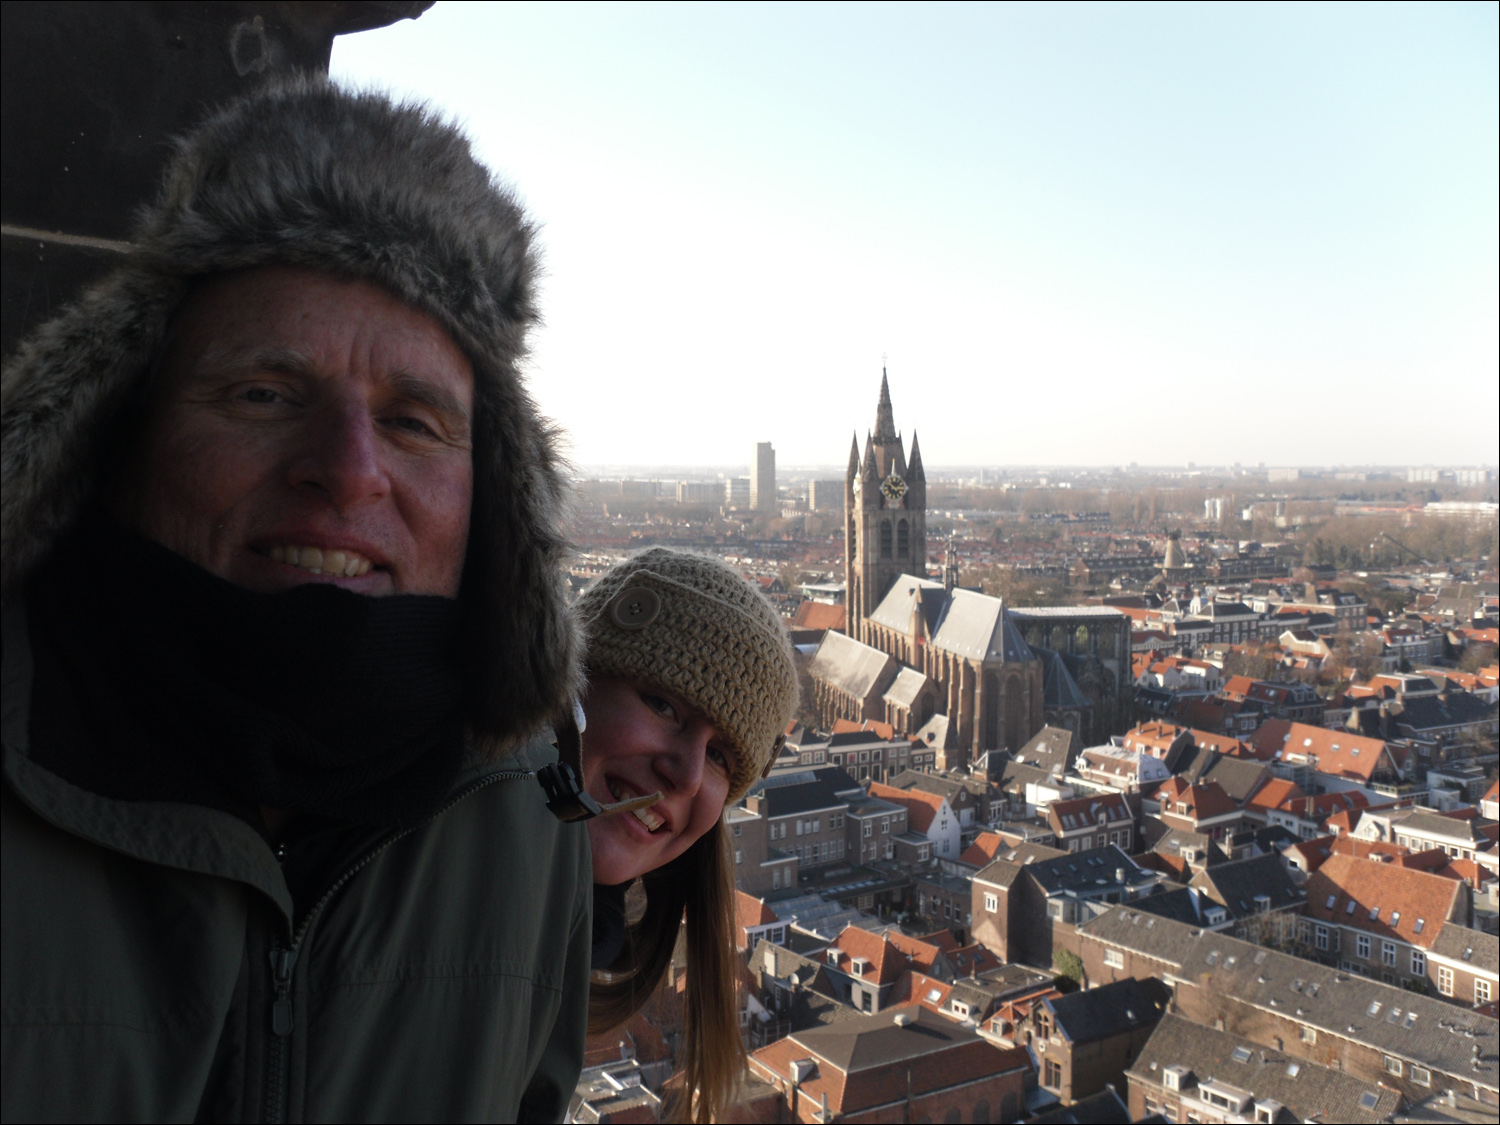 Views from the top of the clock tower on Nieuwe Kerk- Oude Kerk in background-Bob and Becky